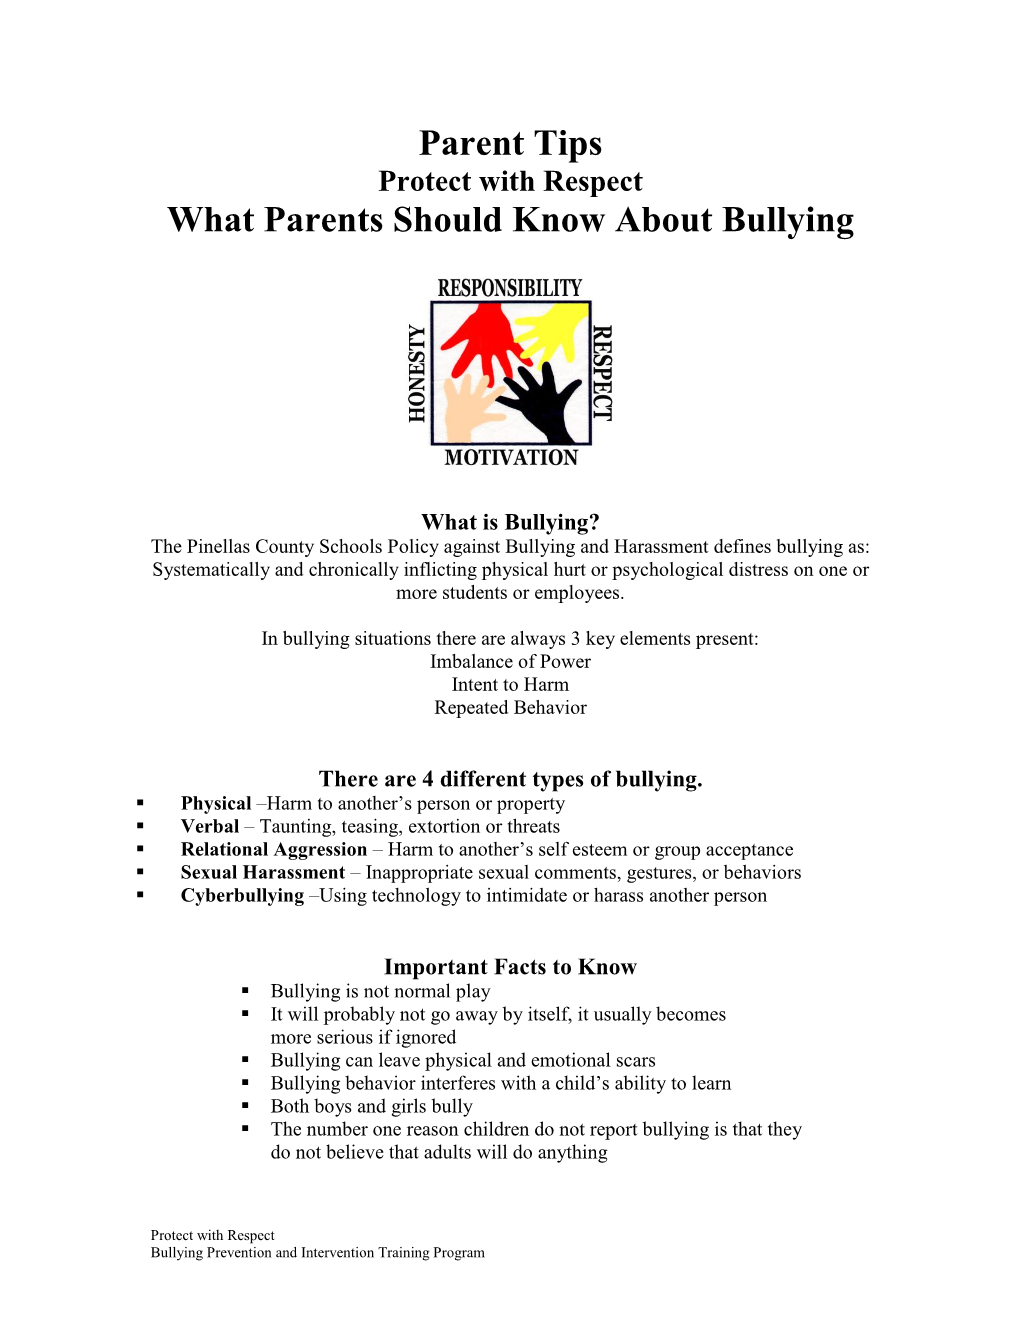 Parent Tips Protect with Respect What Parents Should Know About Bullying